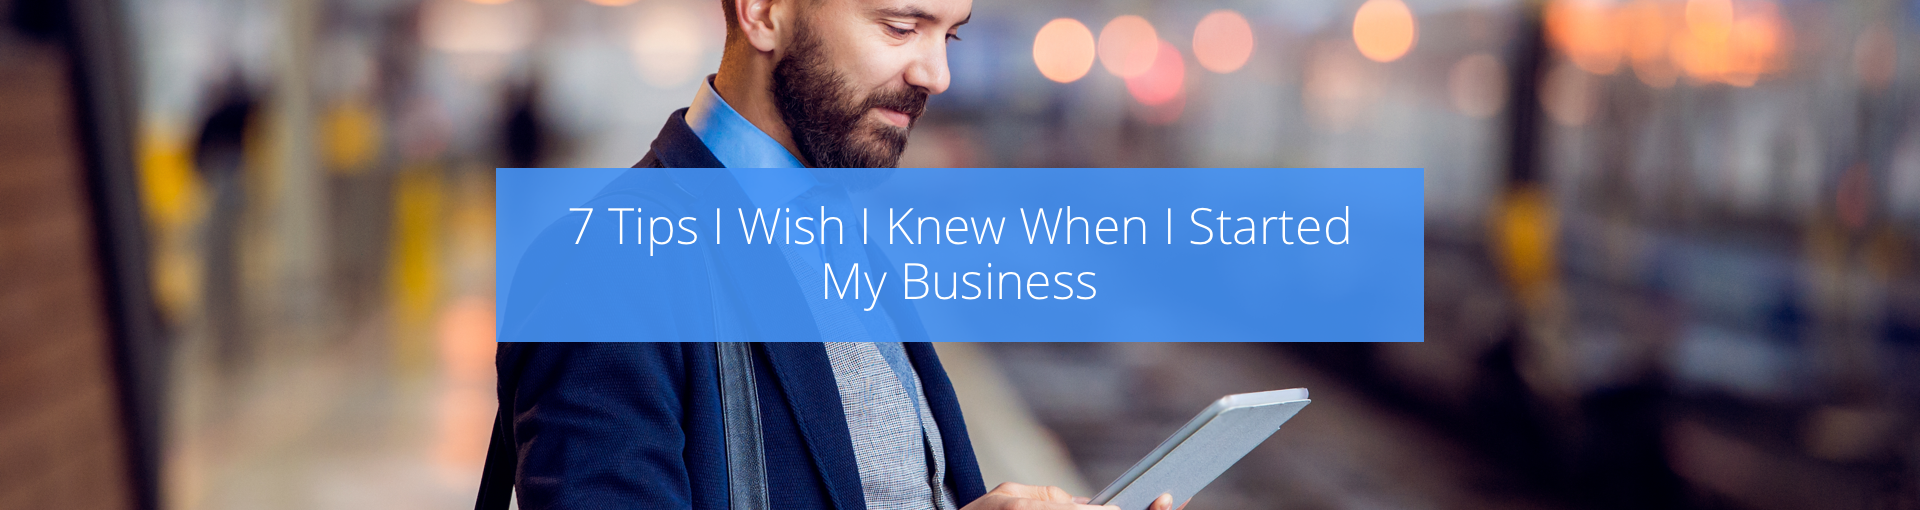 7 Tips I Wish I Knew When I Started My Business Featured Image